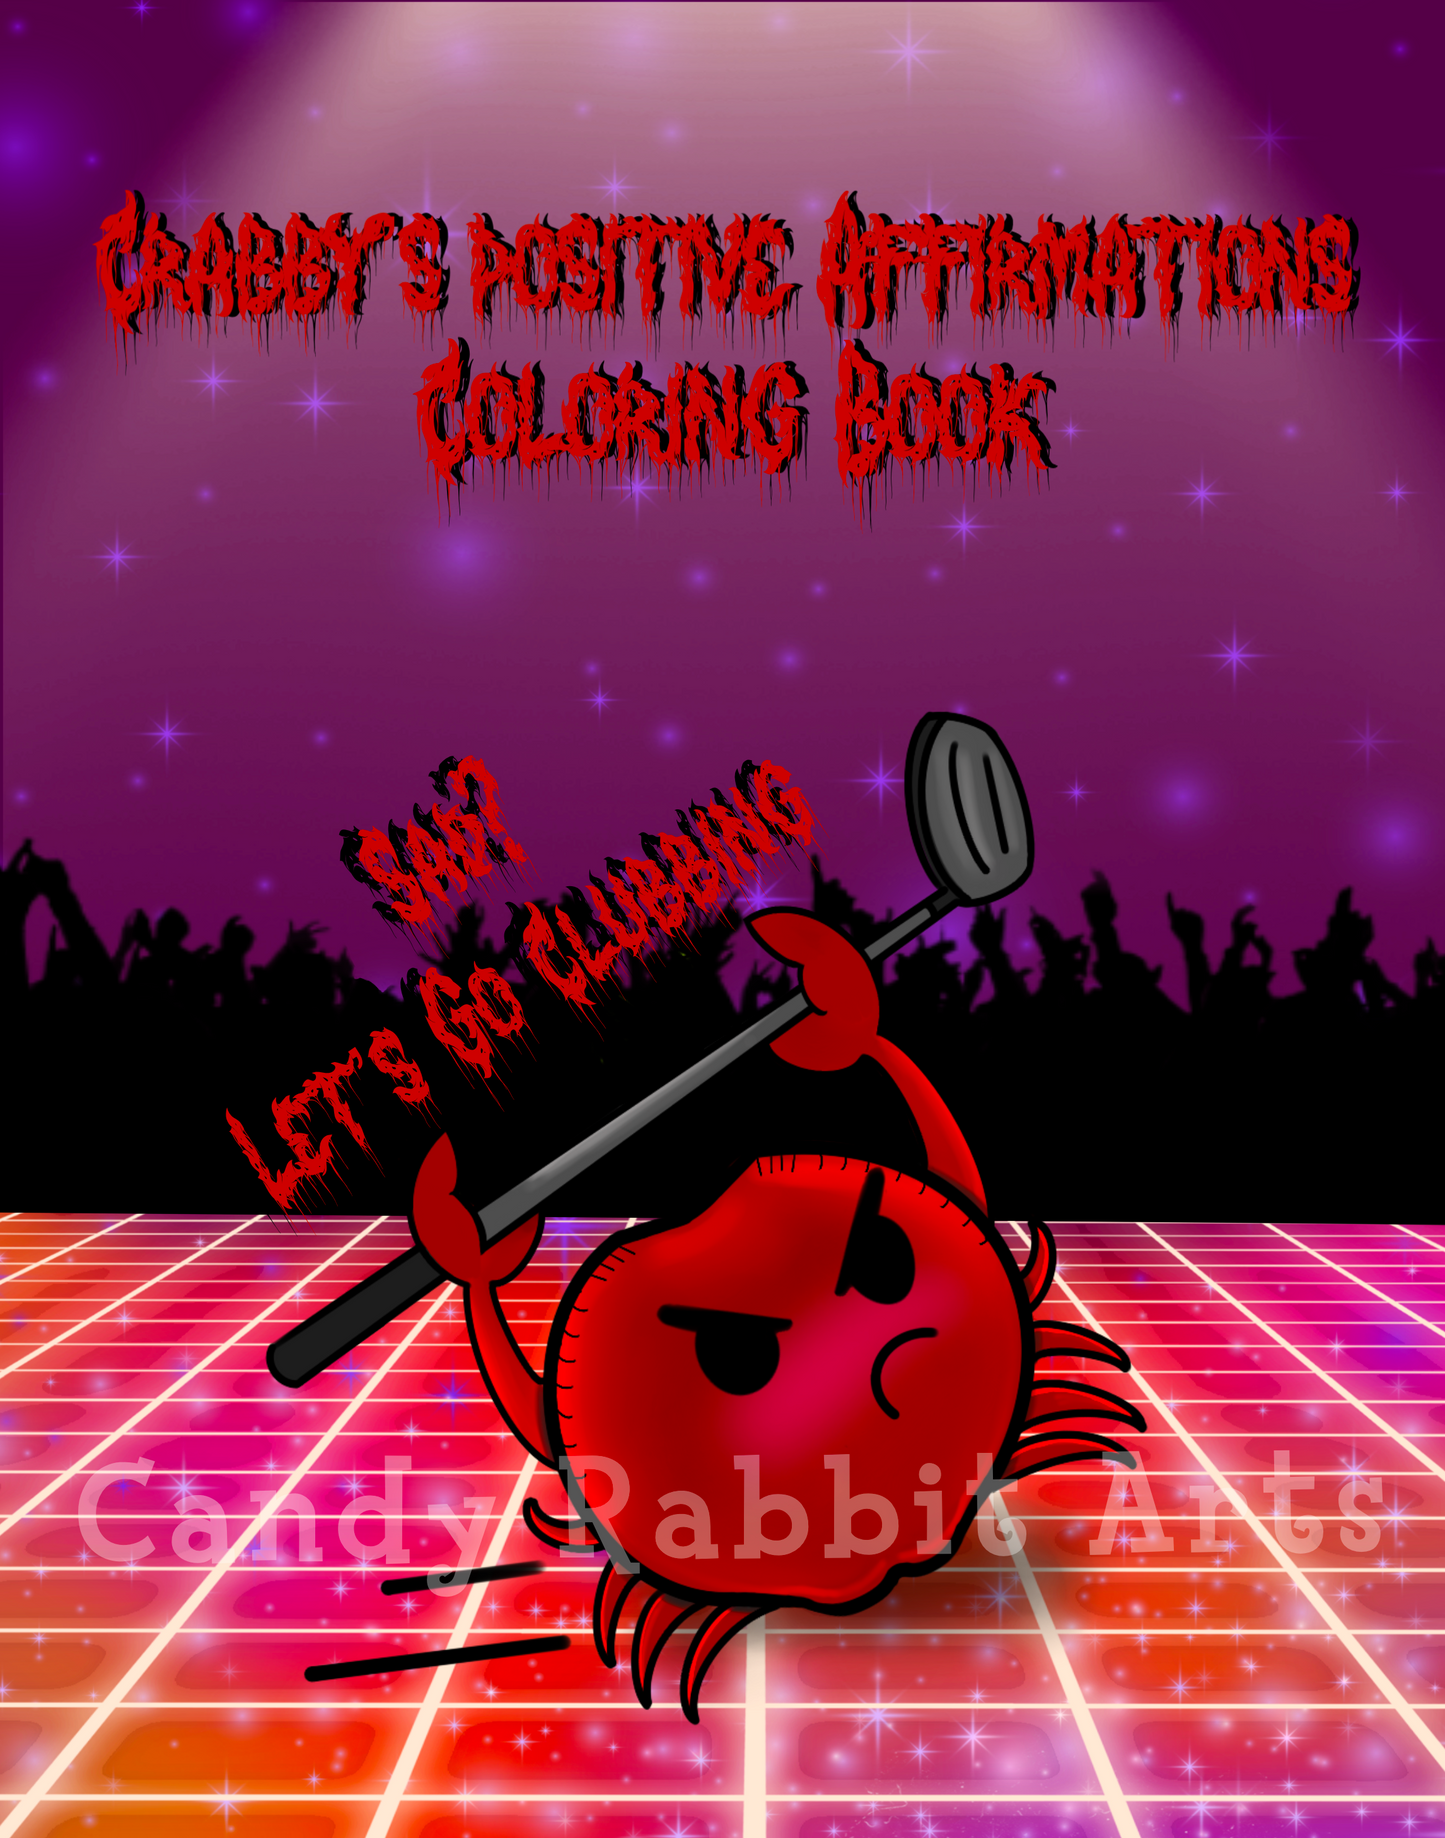 Crabby’s Positive Affirmations Coloring Book